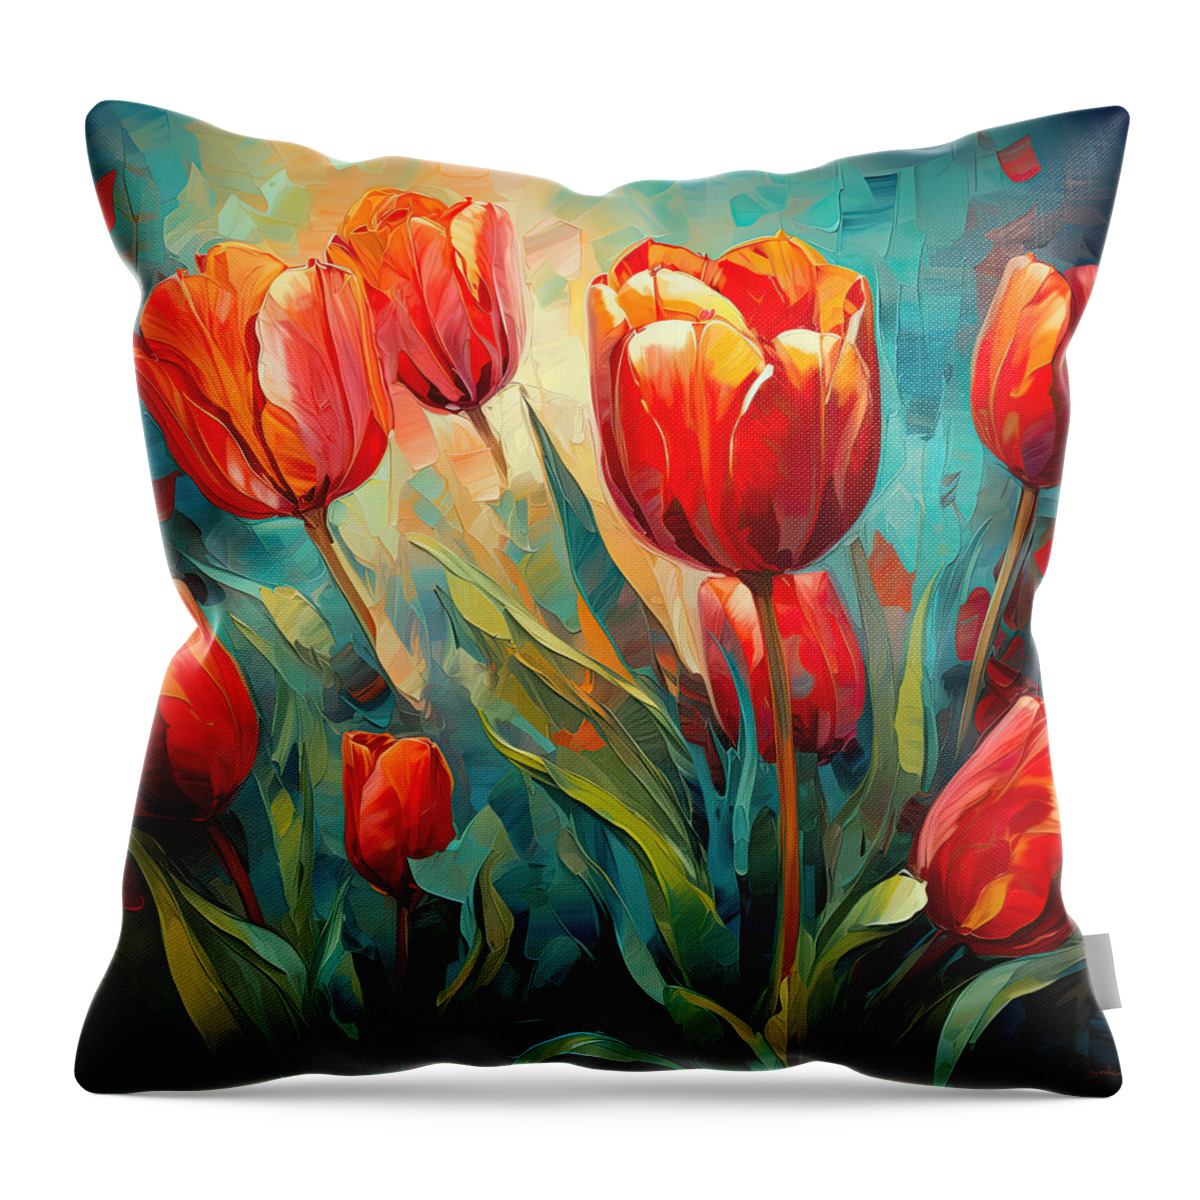 Red Tulips Throw Pillow featuring the digital art Blaze of Orange and Red - Red and Orange Tulips by Lourry Legarde